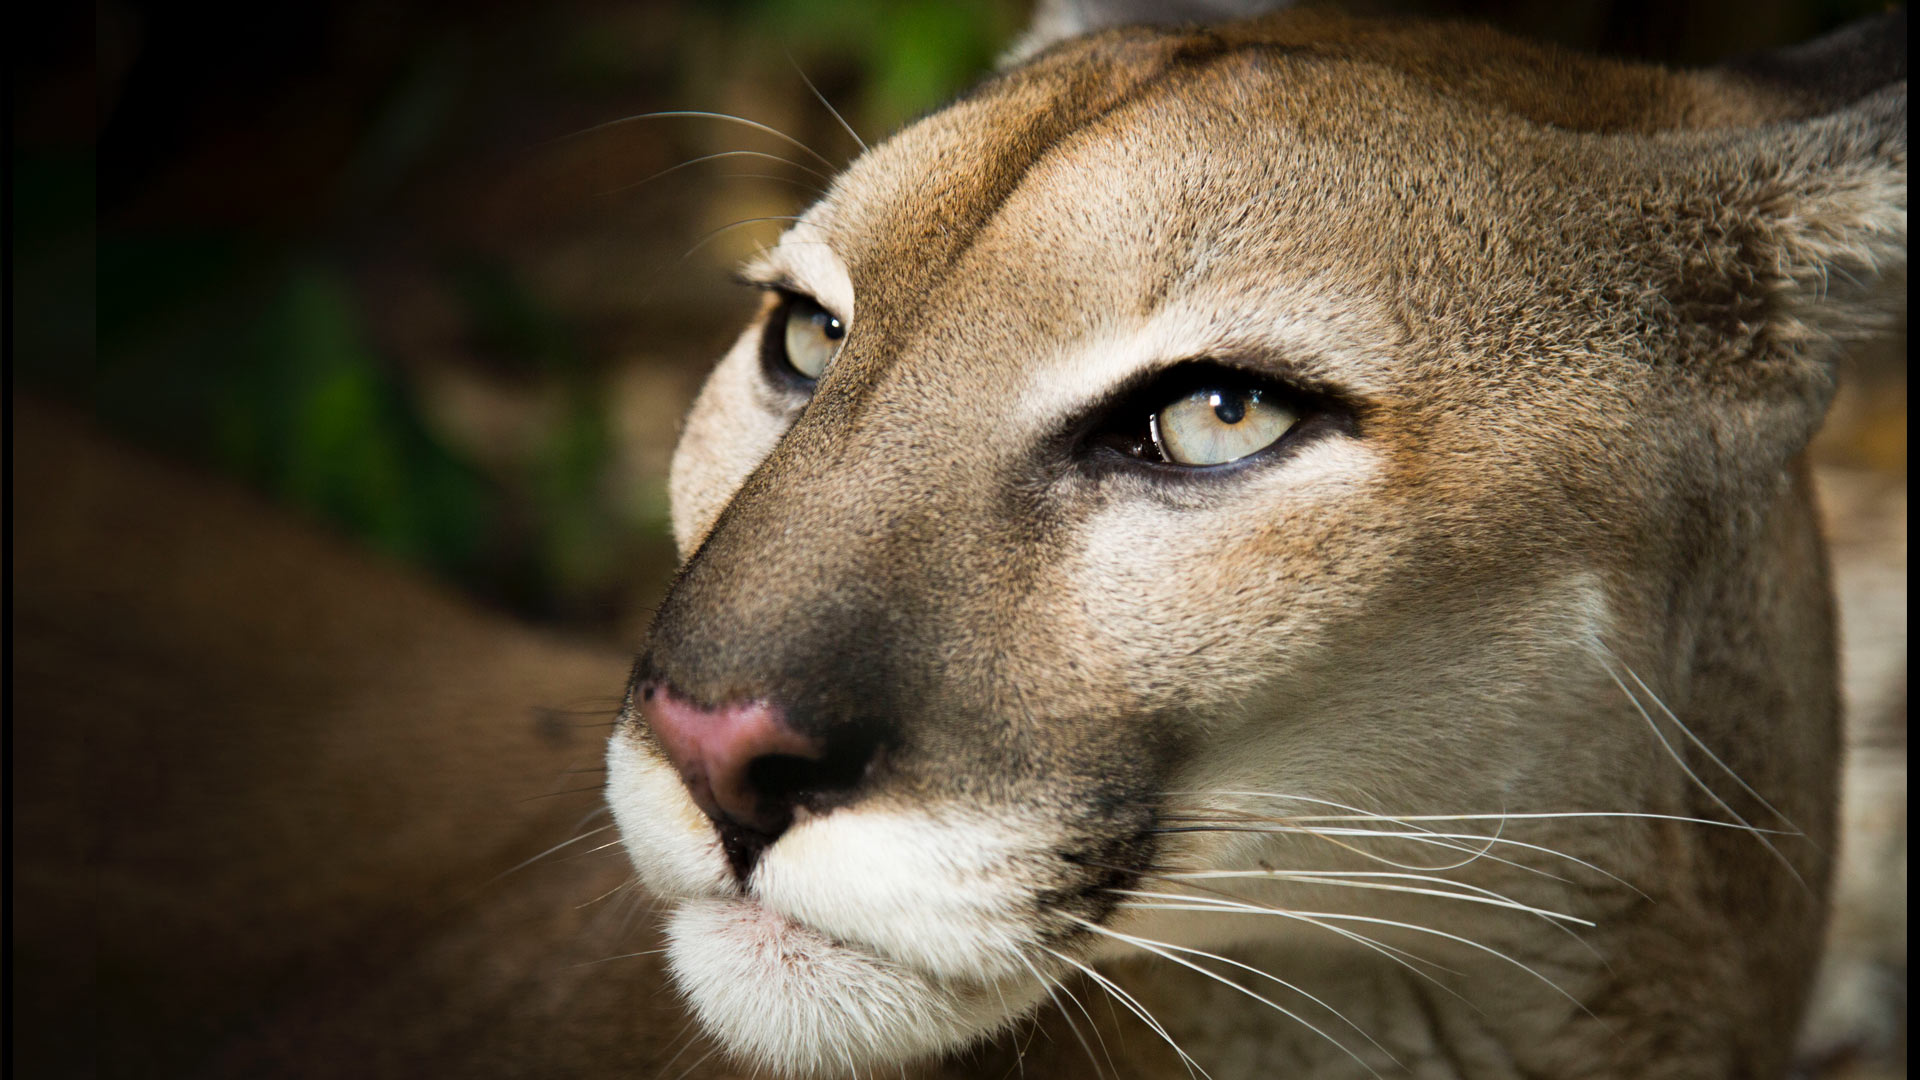 Pumas (Puma concolor) are the widest ranging mammal in the Americas, thanks to extraordinary adaptability and an eye for opportunity.